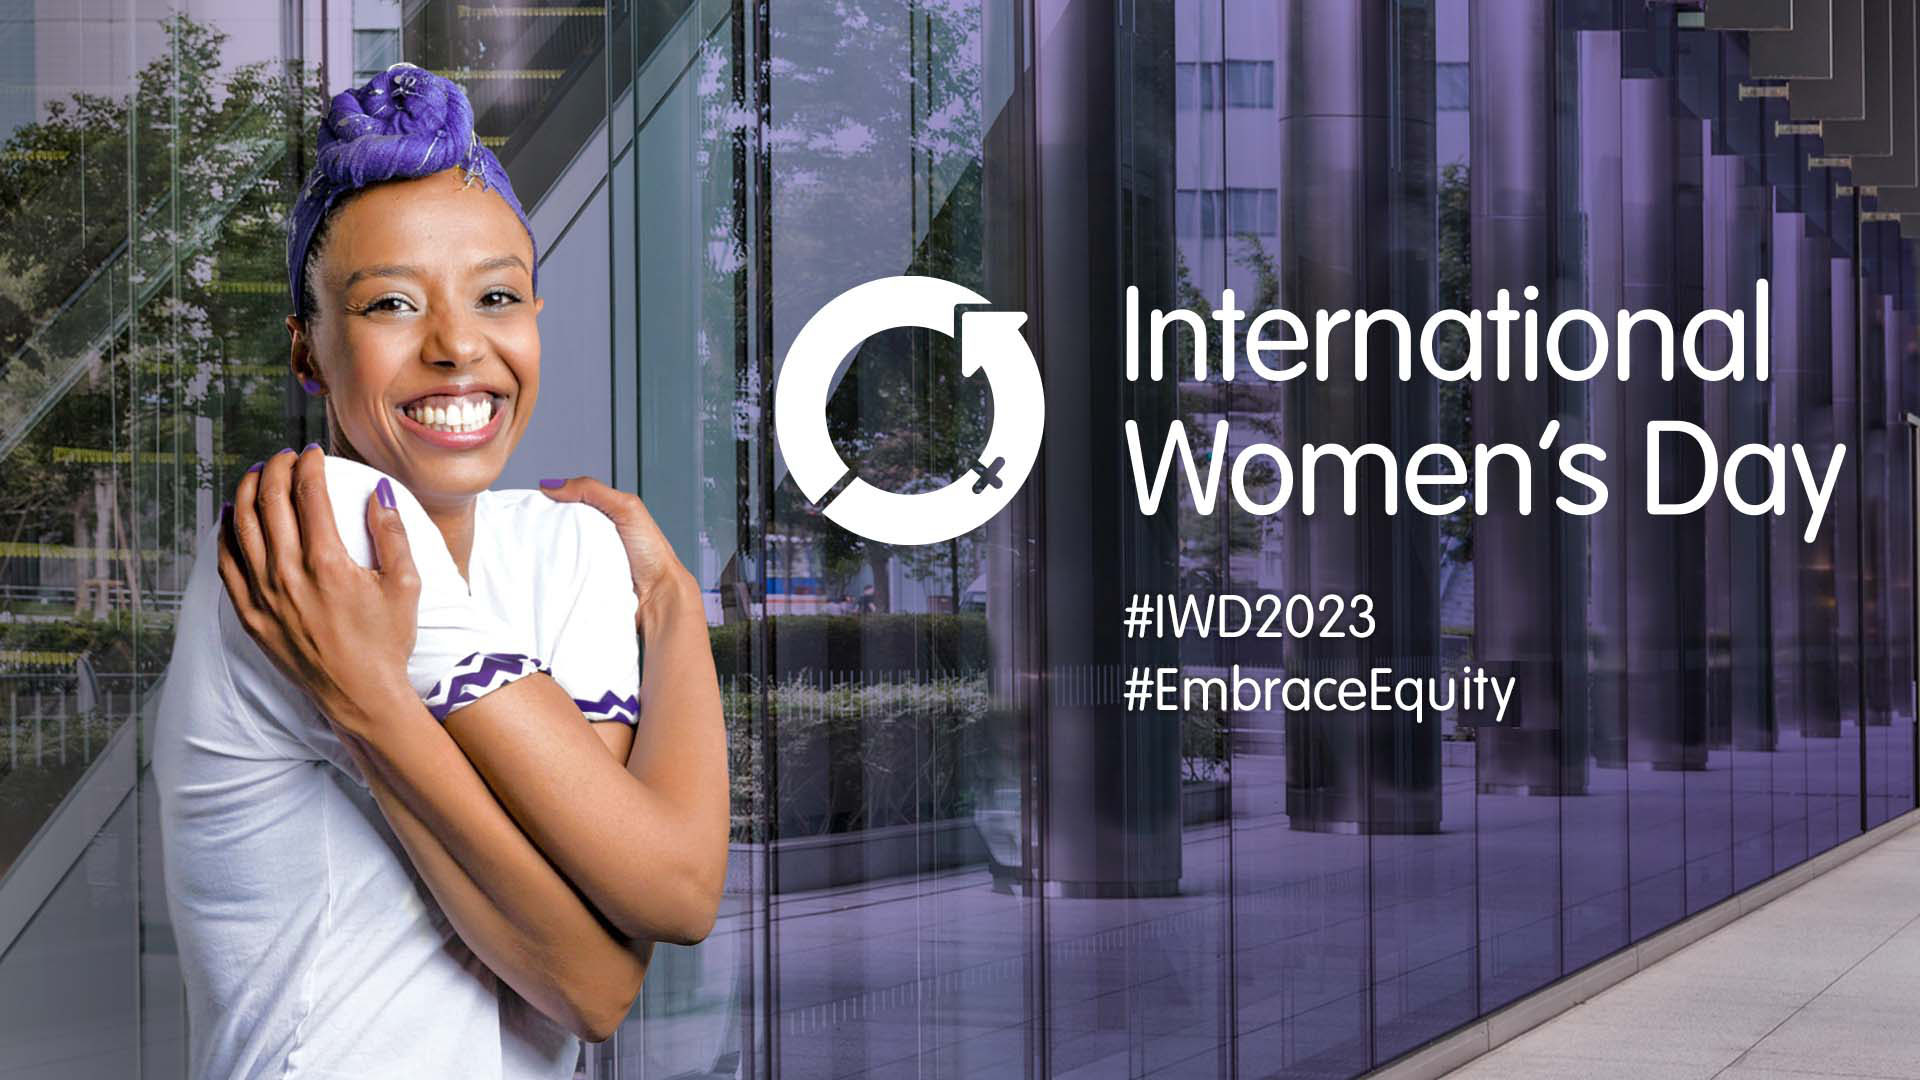 Smiling woman, hugging herself. Text: International Women's Day, #WD2023, #EmbraceEquity.